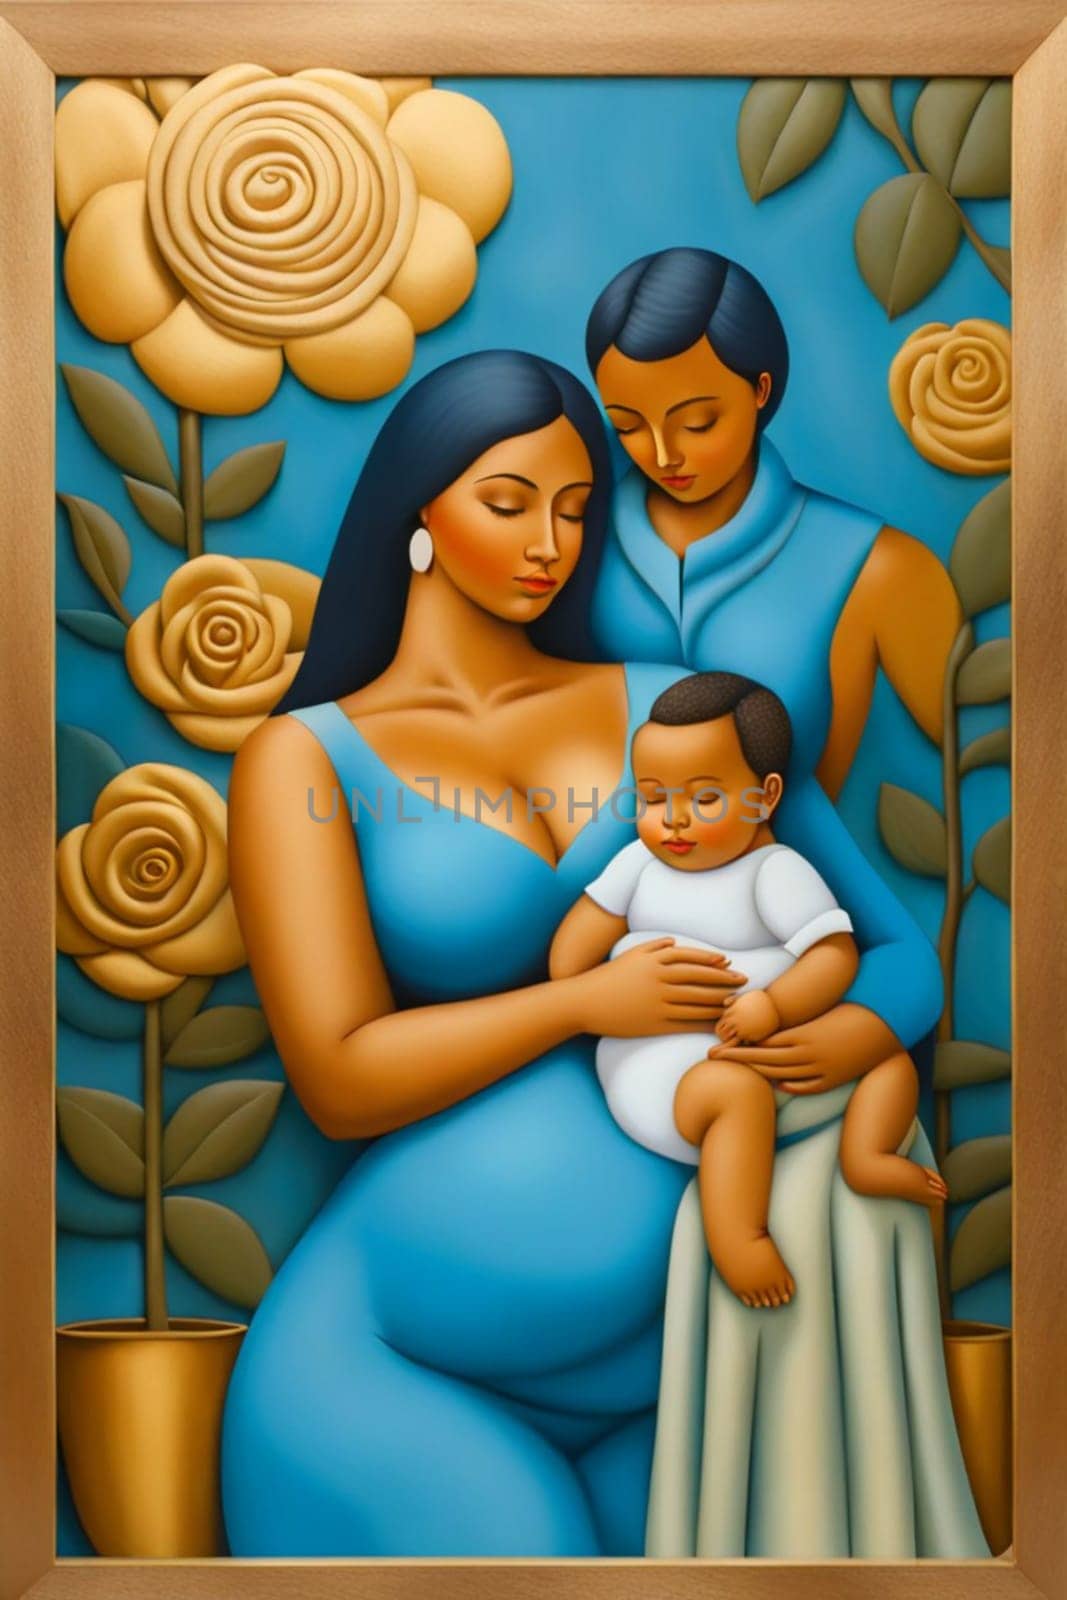 fashion portrait of modern empowered woman mother and baby illustration , blue, copper and pastel by verbano